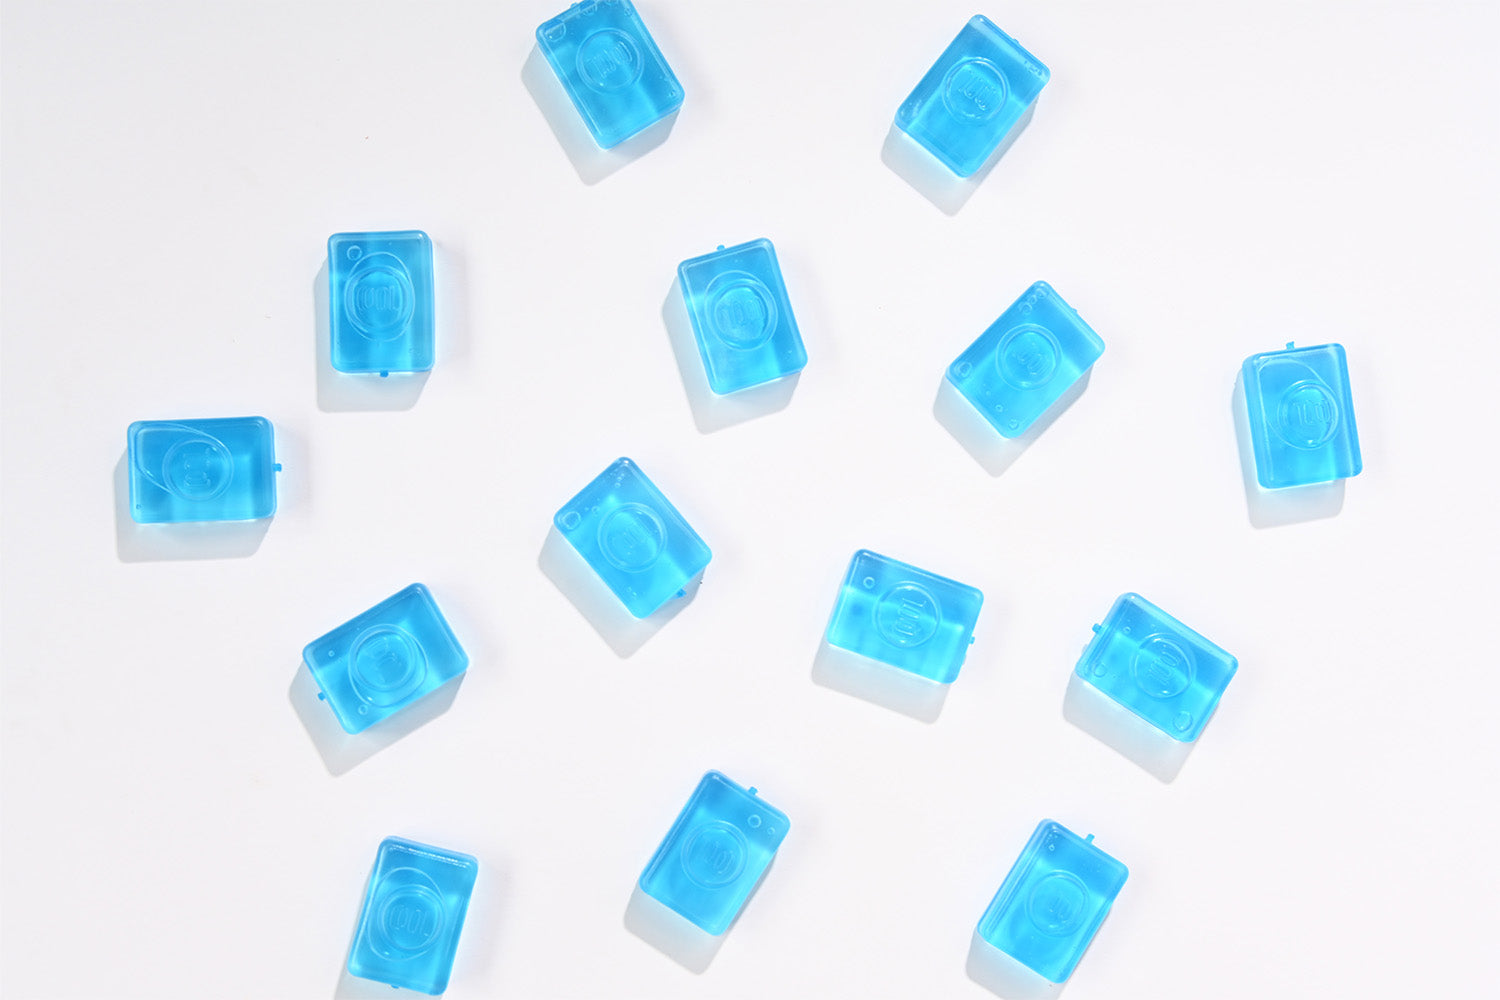 Do Reusable Ice Cubes Work for Cooling Towels?